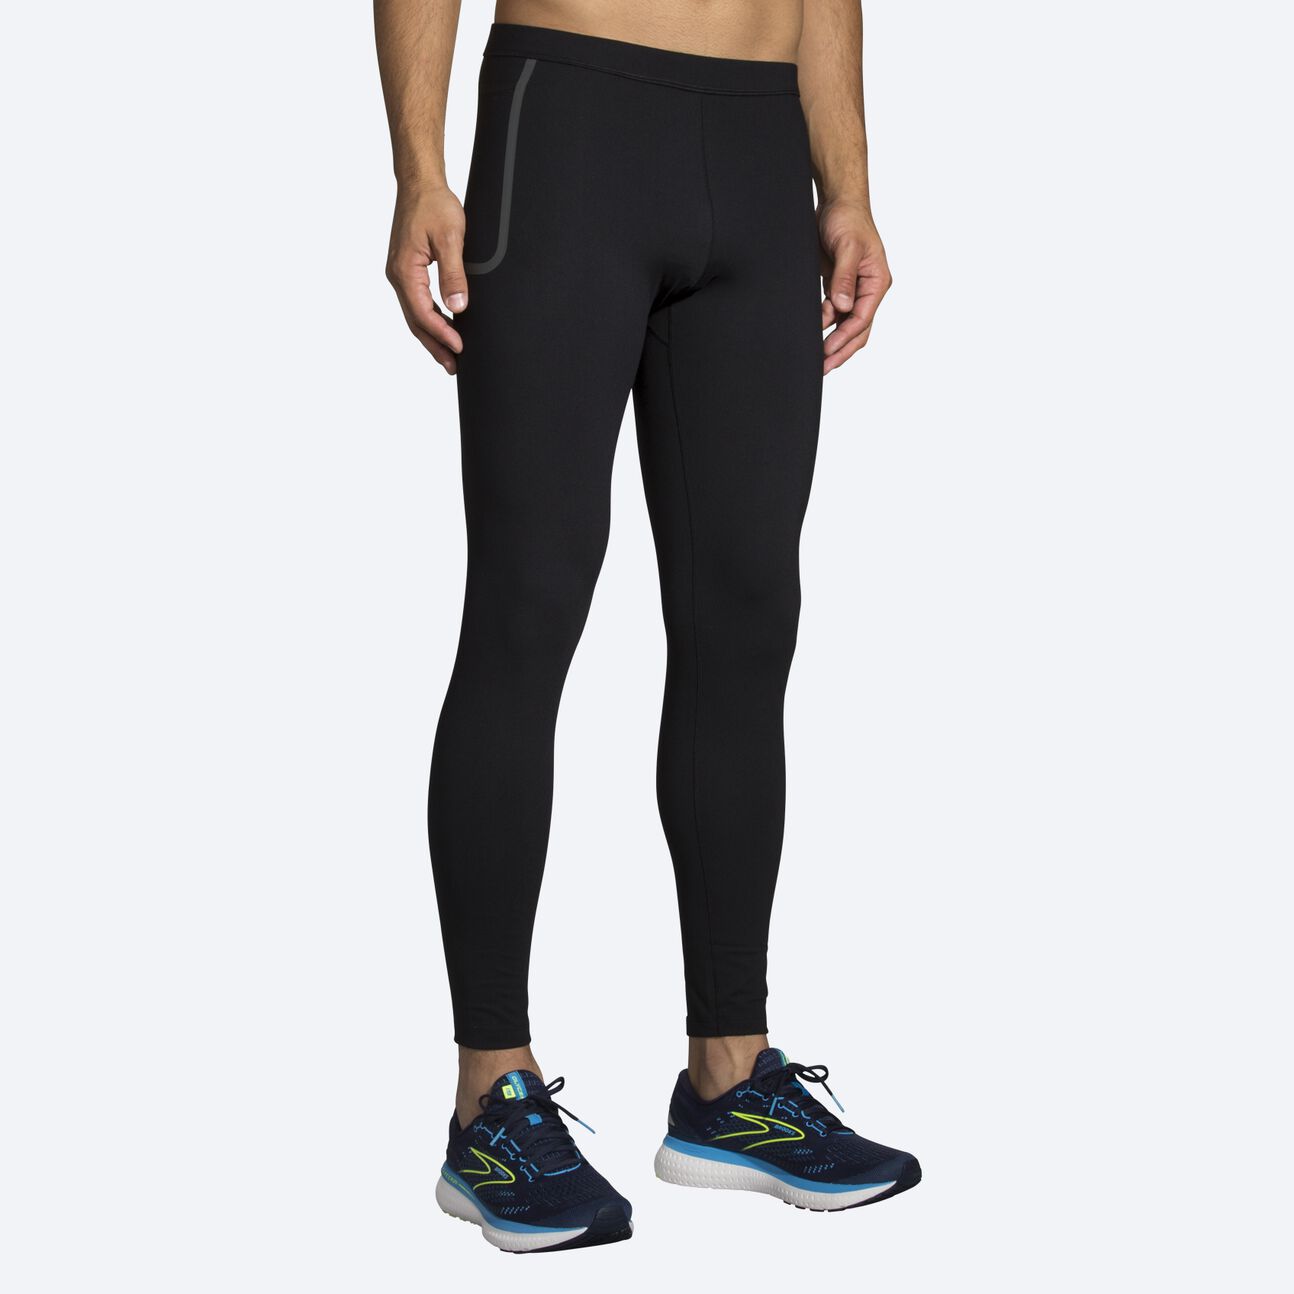 Nike Element Thermal Men's Running Tights